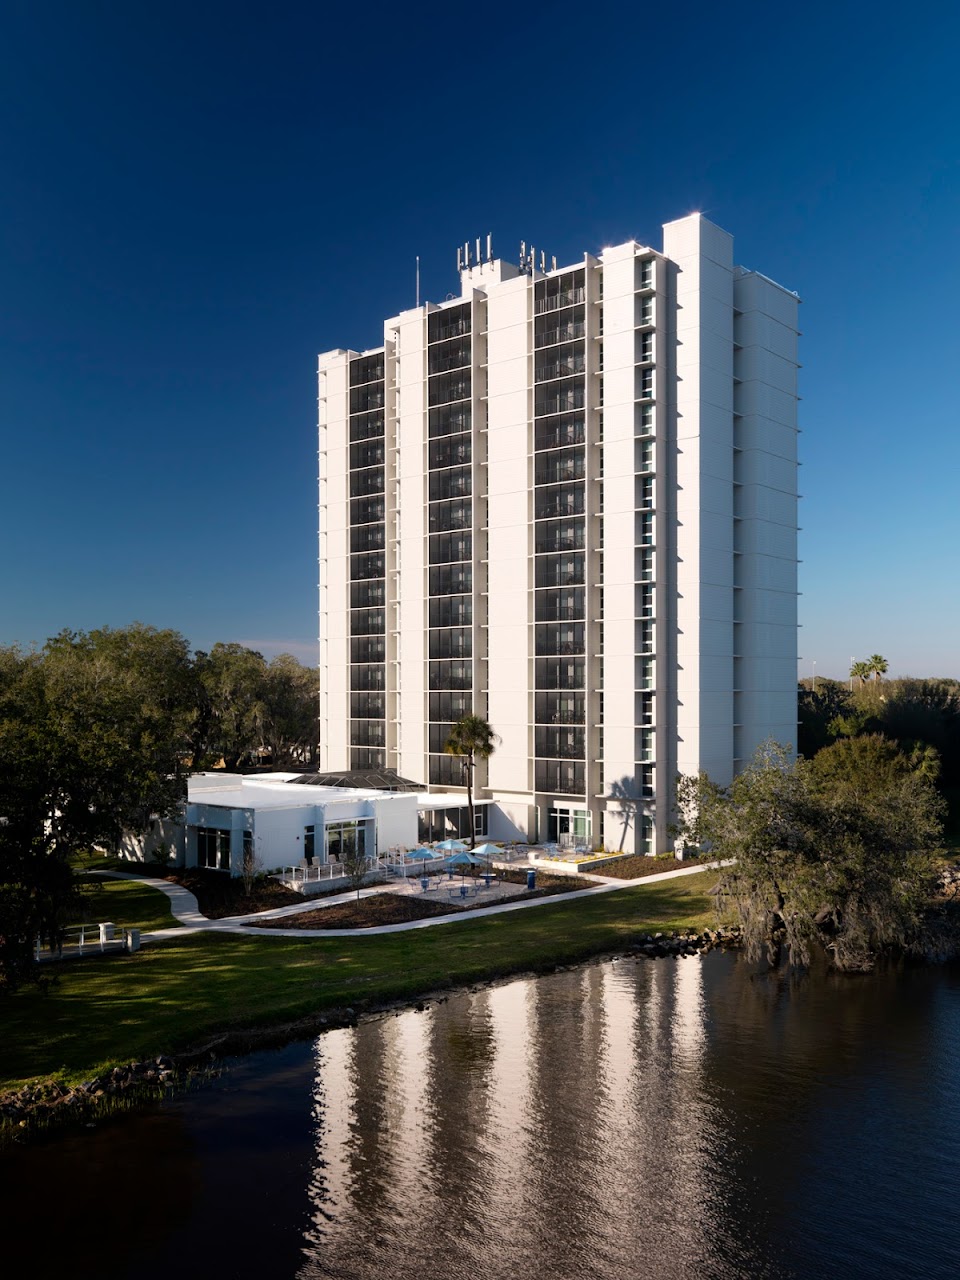 Photo of AQUA. Affordable housing located at 4505 N ROME AVE TAMPA, FL 33603